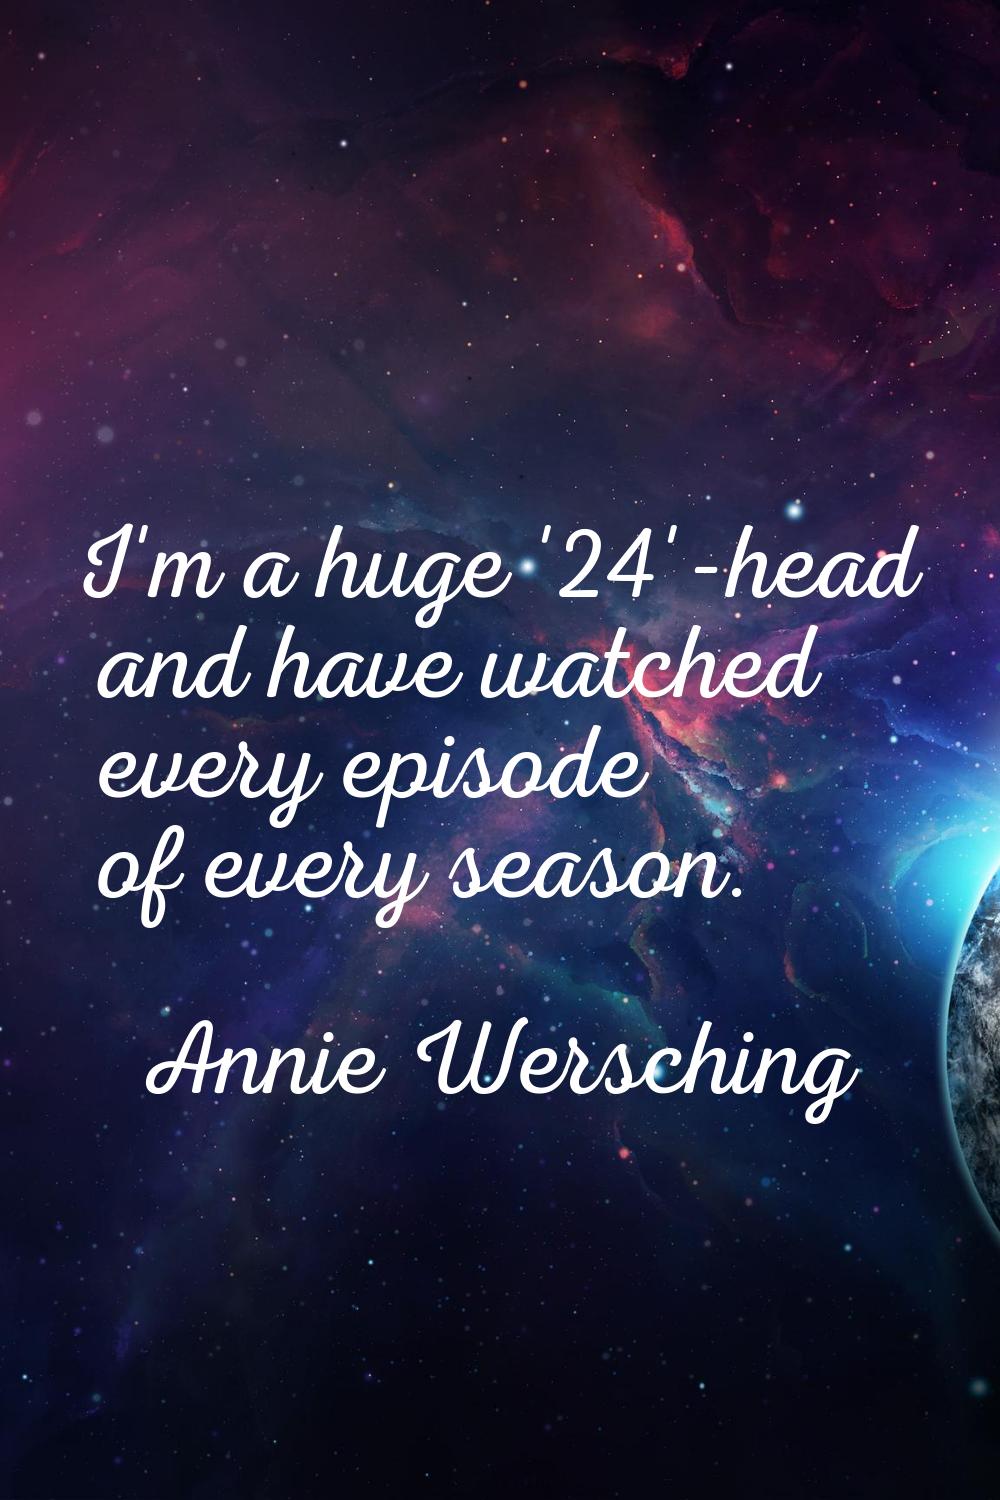 I'm a huge '24'-head and have watched every episode of every season.